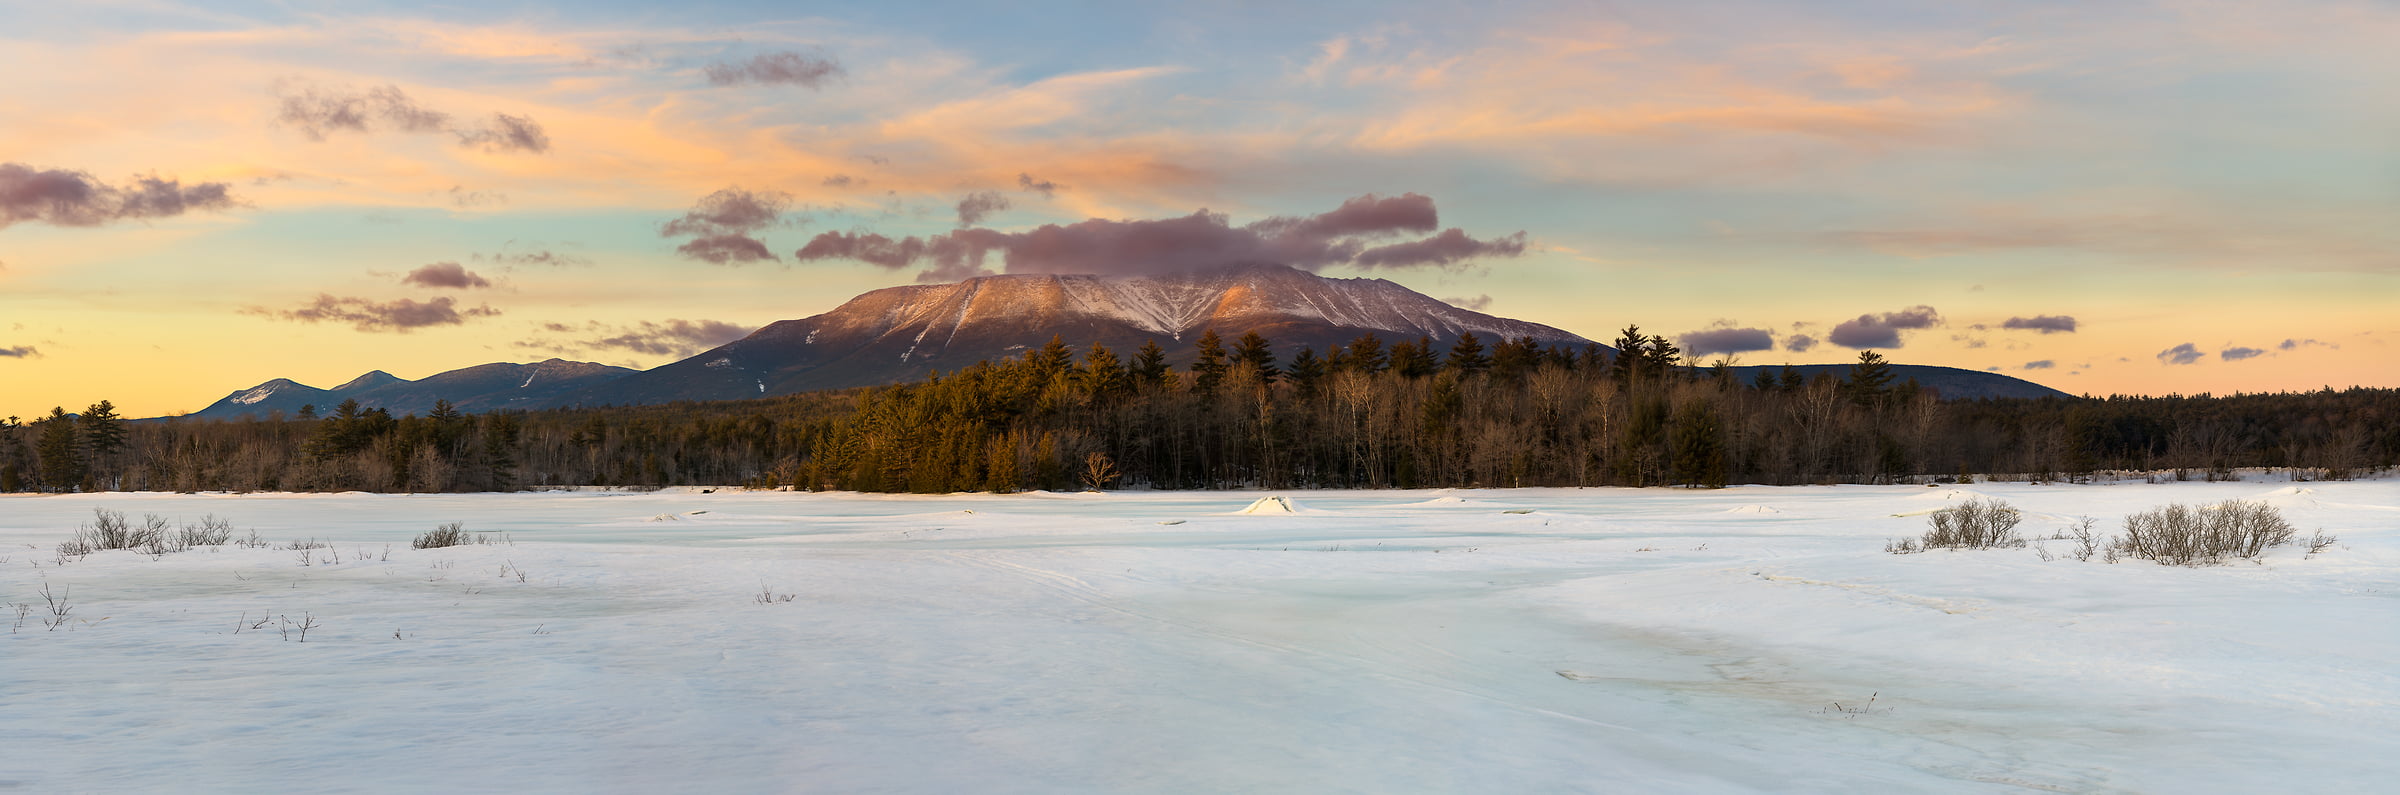 1,310 megapixels! A very high resolution, large-format panorama photo of Mt. Katahdin at sunset during winter; fine art landscape photograph created by Aaron Priest at River Pond, Millinocket, Maine.